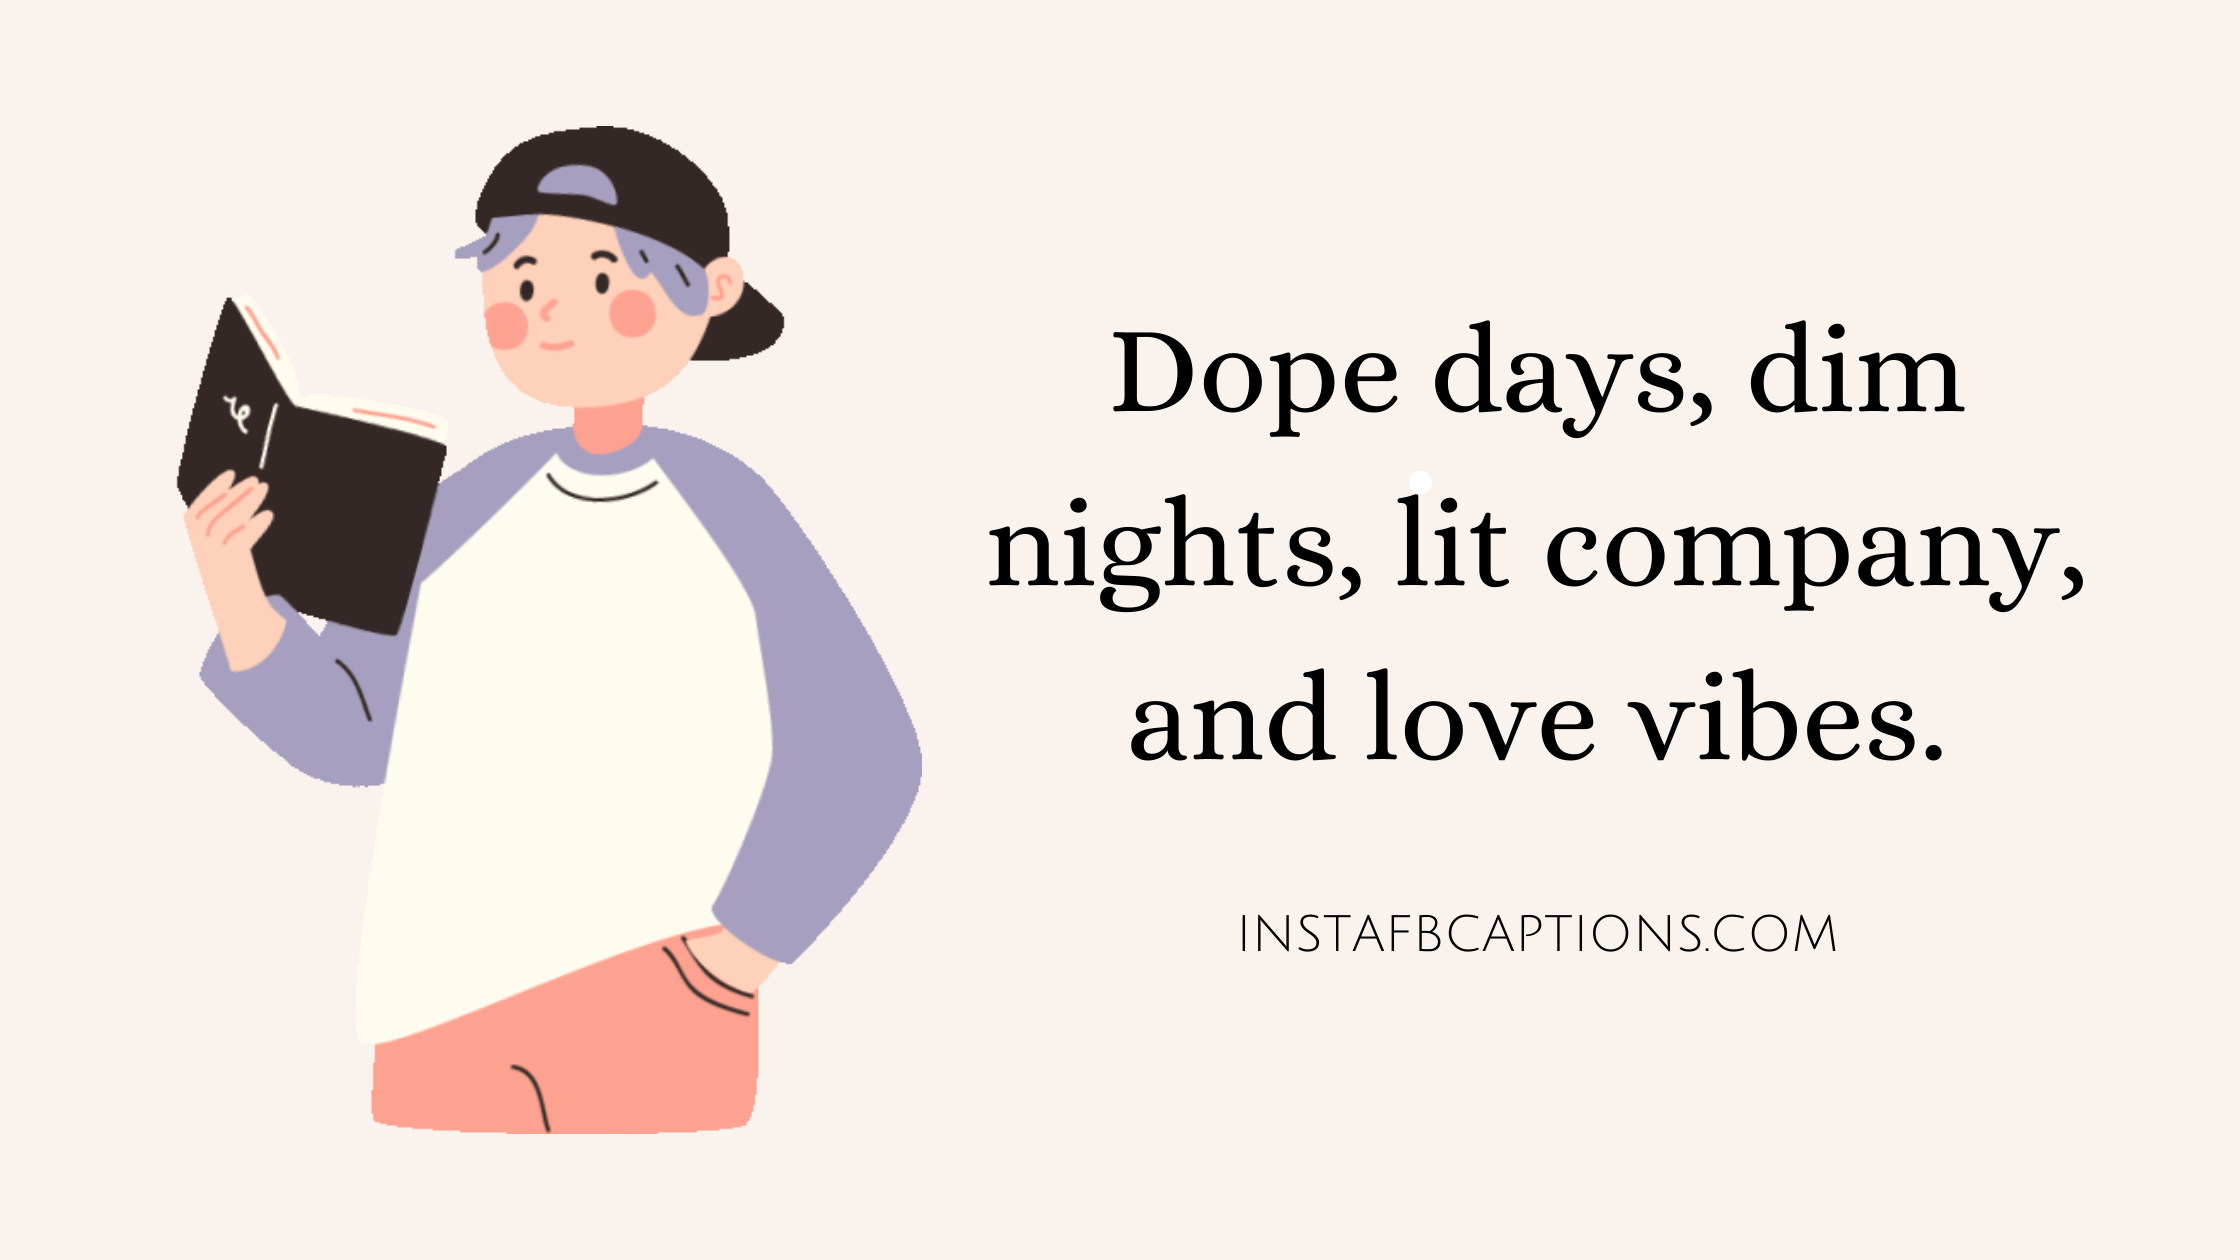 A caption written - "Dope days, dim nights, lit company, and love vibes"  - Instagram Reels Captions For Boys - 150+ Popular Captions For Your Classy Reels On Instagram